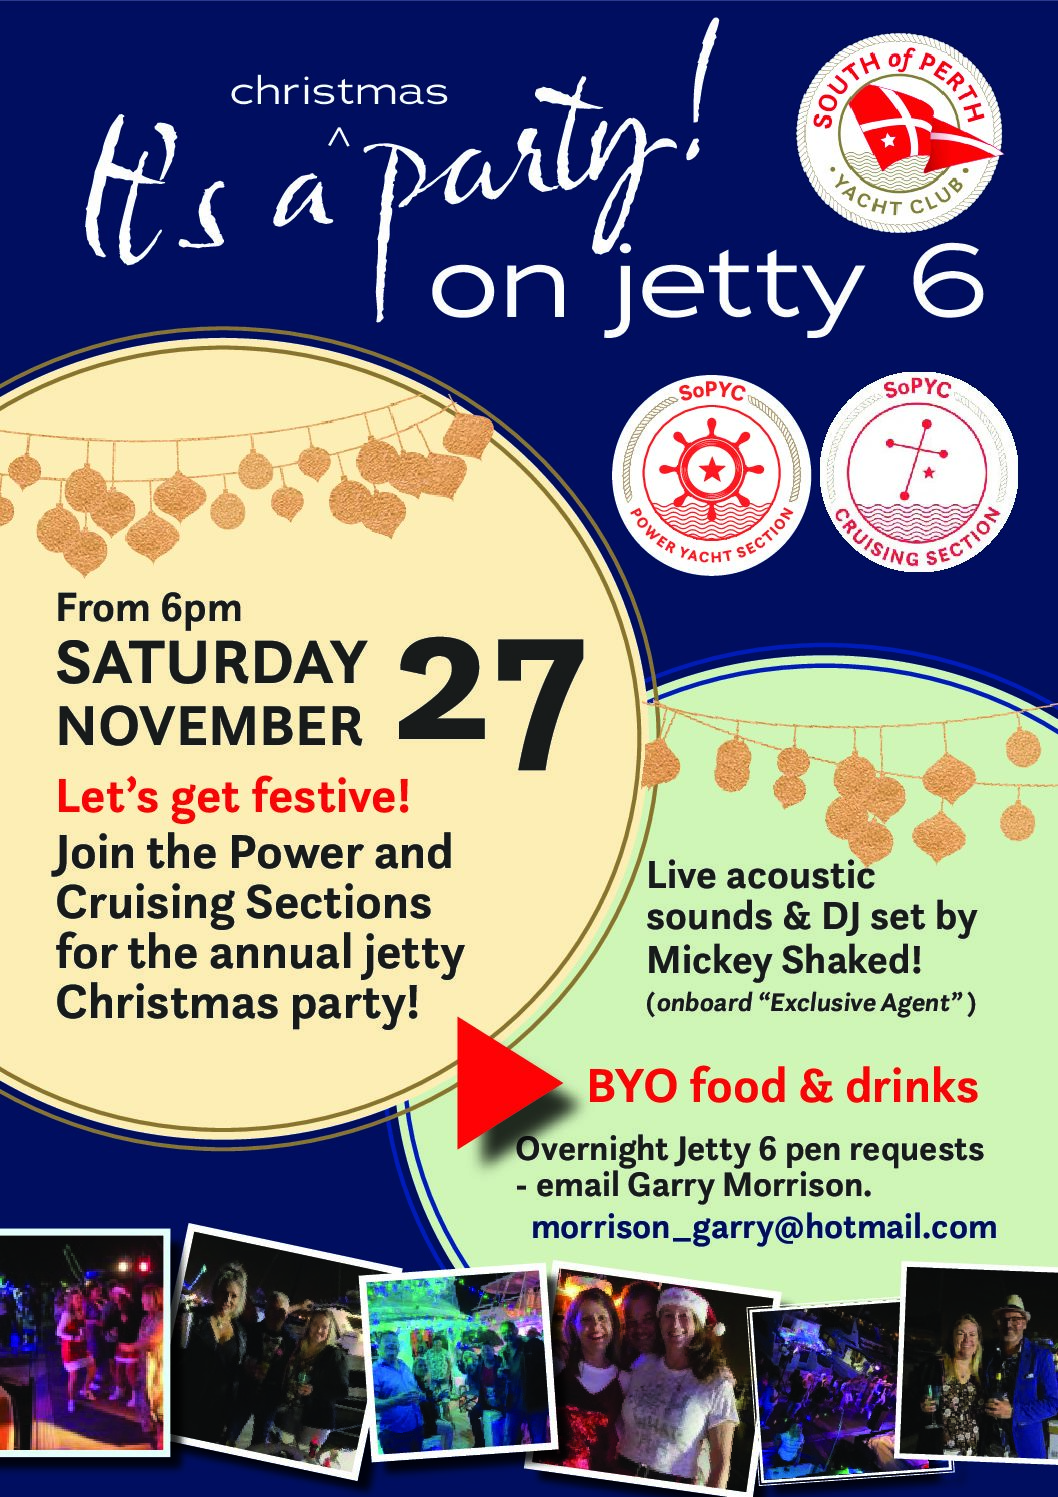 It's a Christmas Party on Jetty 6!